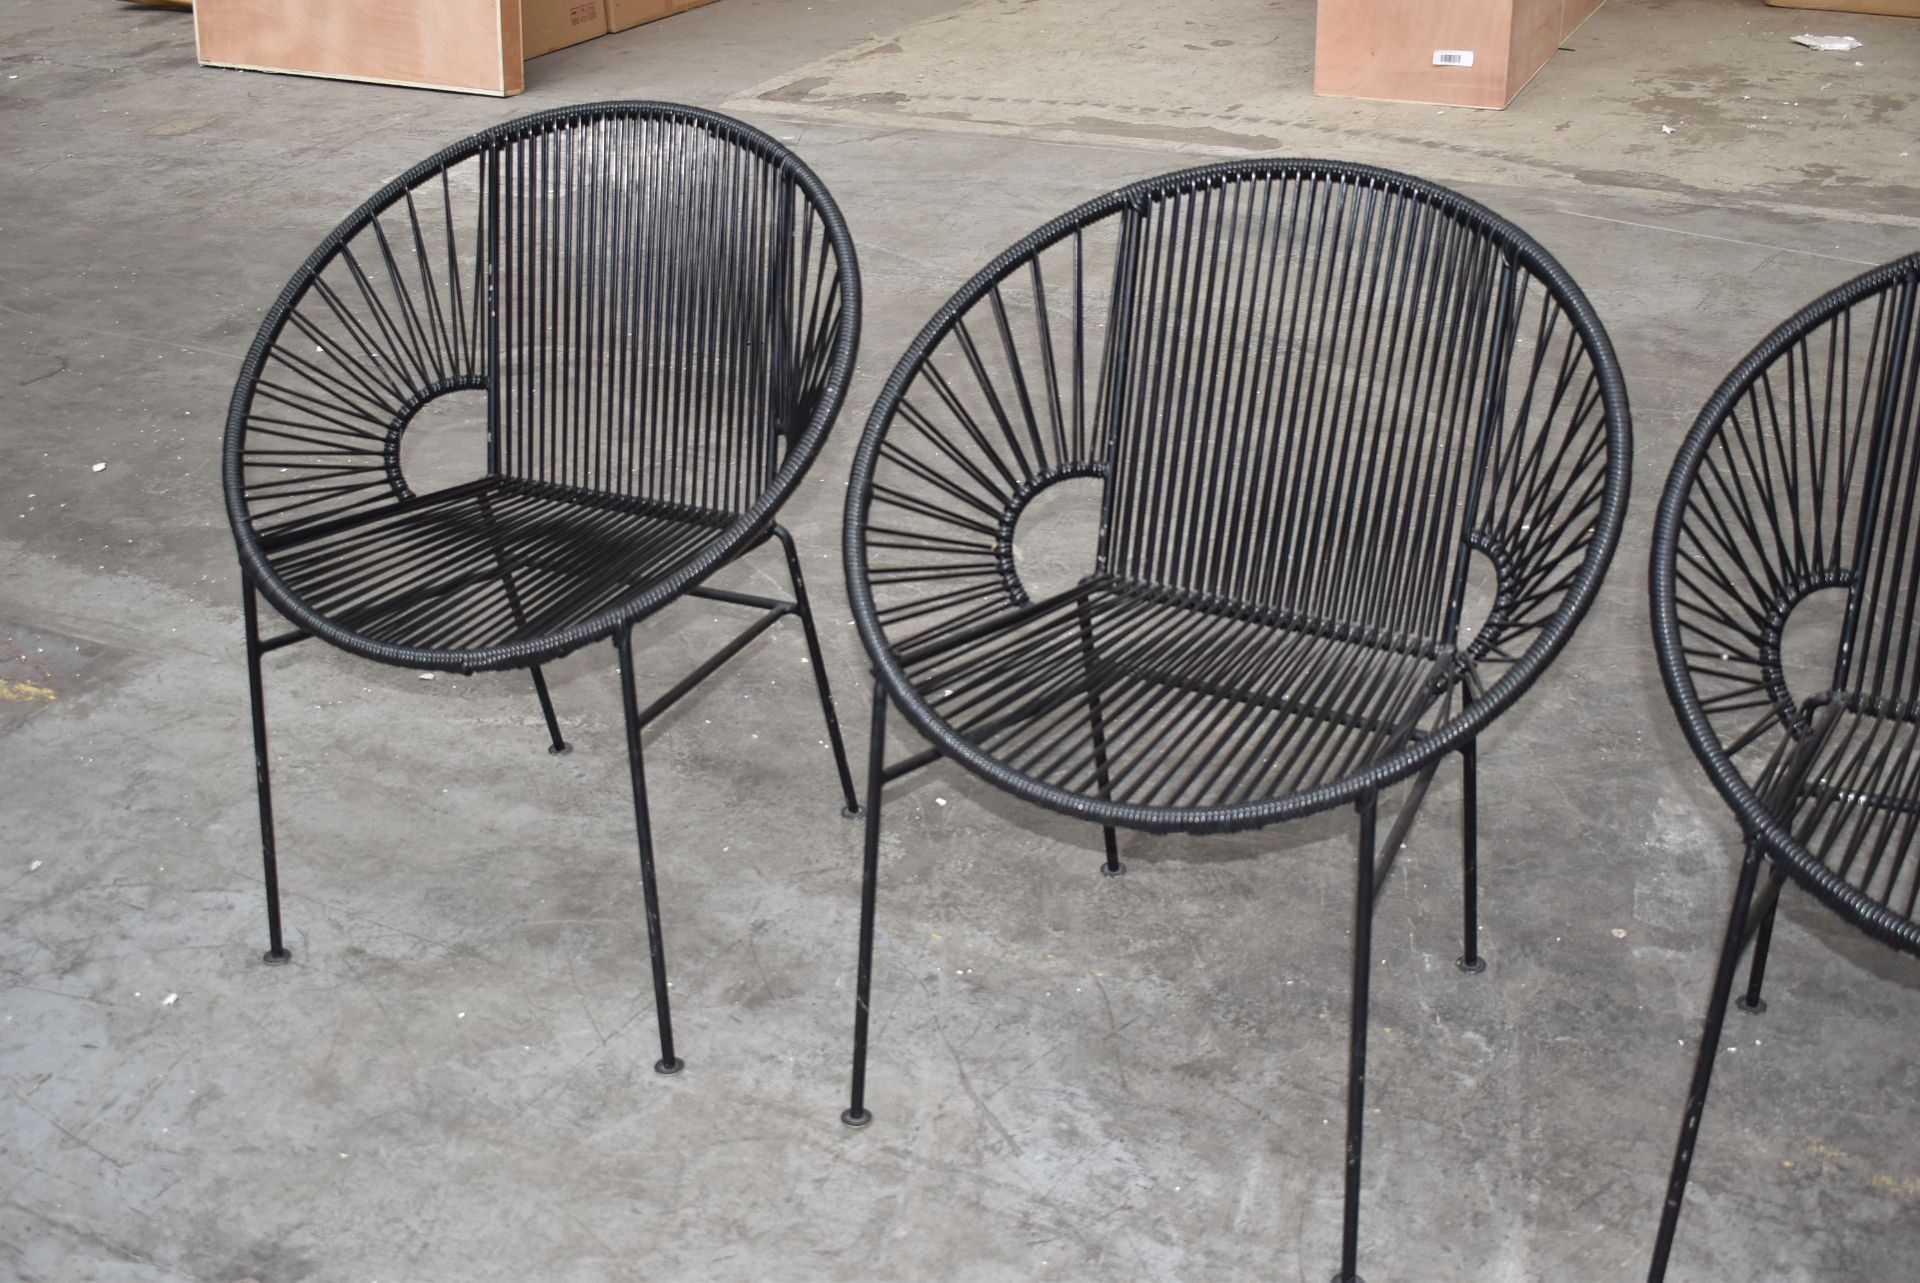 4 x Innit Designer Chairs - Acapulco Style Chairs in Black Suitable For Indoor or Outdoor Use - - Image 4 of 10